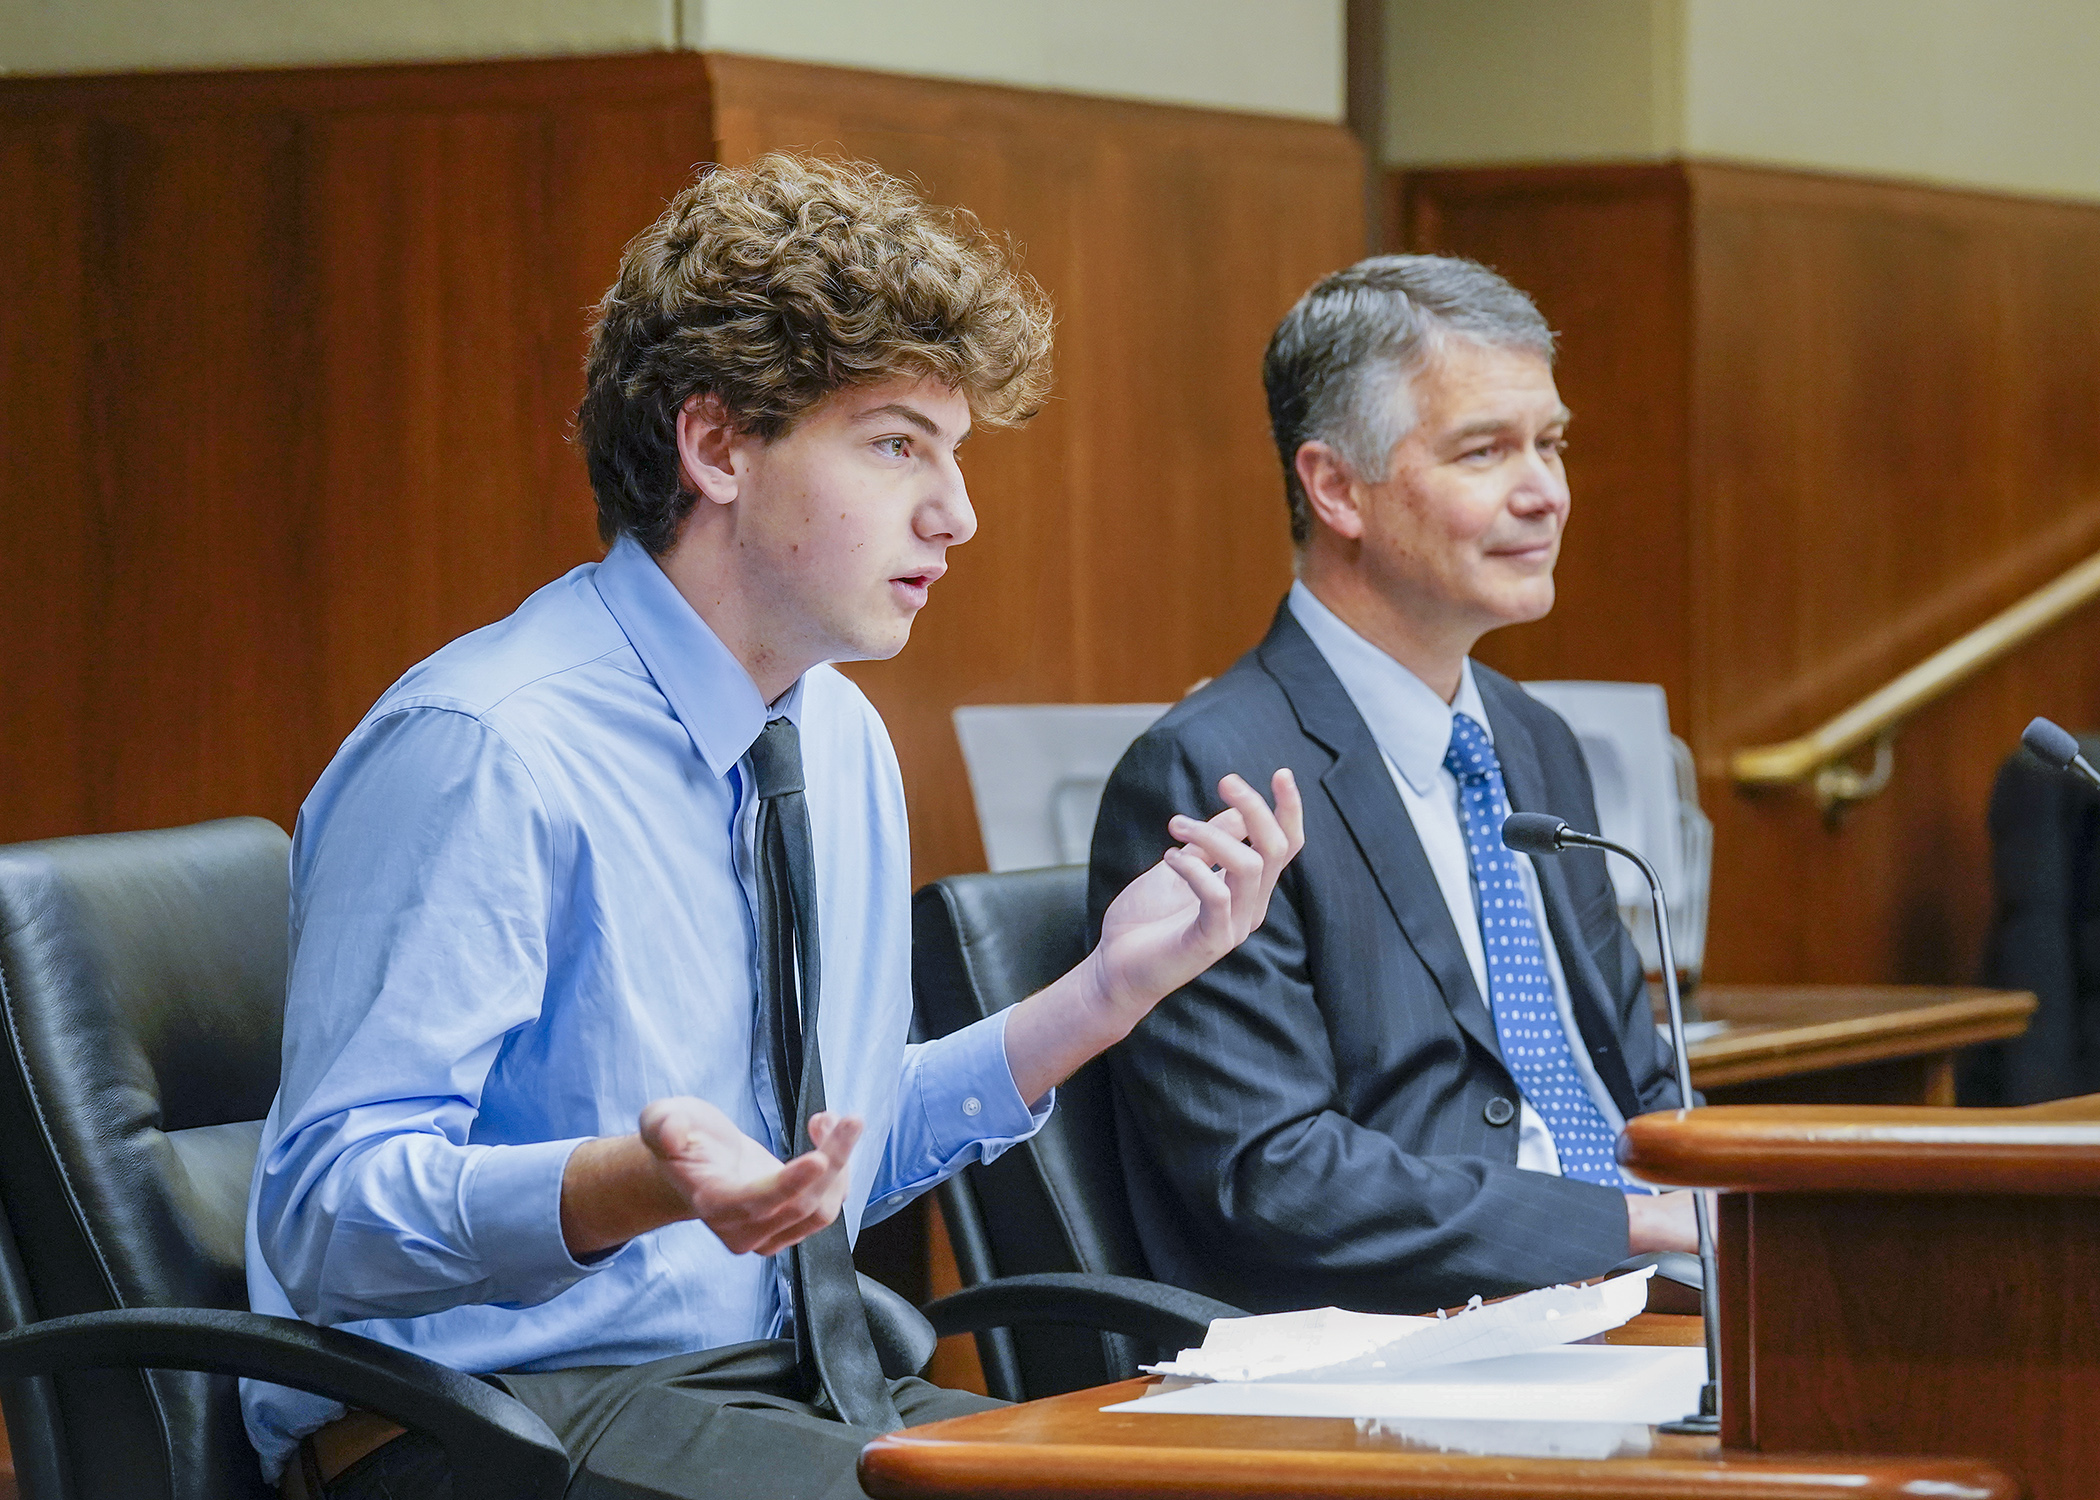 Isaac Israel, a 17-year-old senior at St. Louis Park High School, testifies before the House Elections Finance and Policy Committee Jan. 11 in support of HF110, sponsored by Rep. Larry Kraft, right. (Photo by Andrew VonBank)